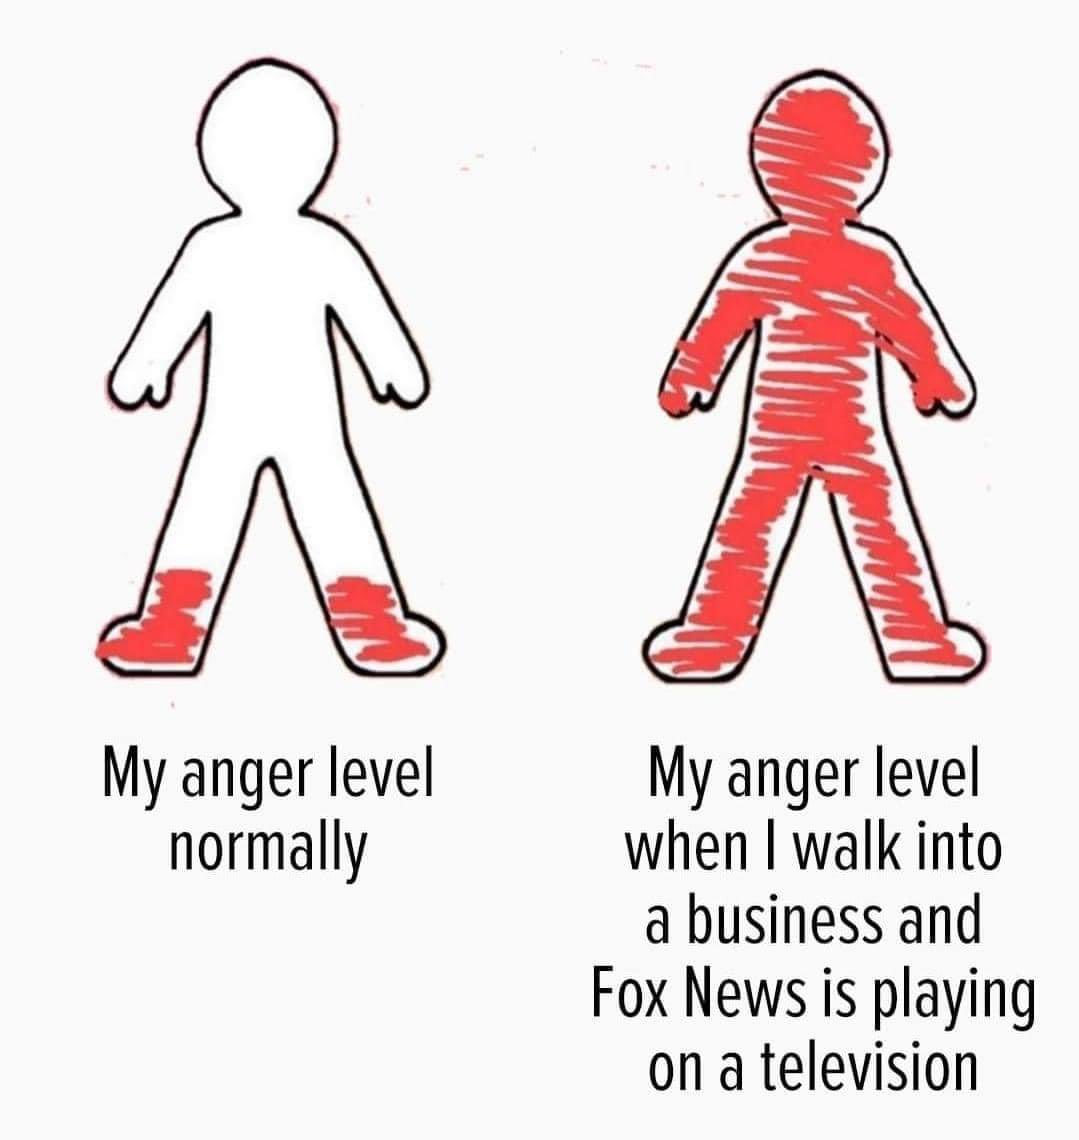 Surely I'm not alone. Anybody else? 
#USDemocracy #DemVoice1 #FoxLies